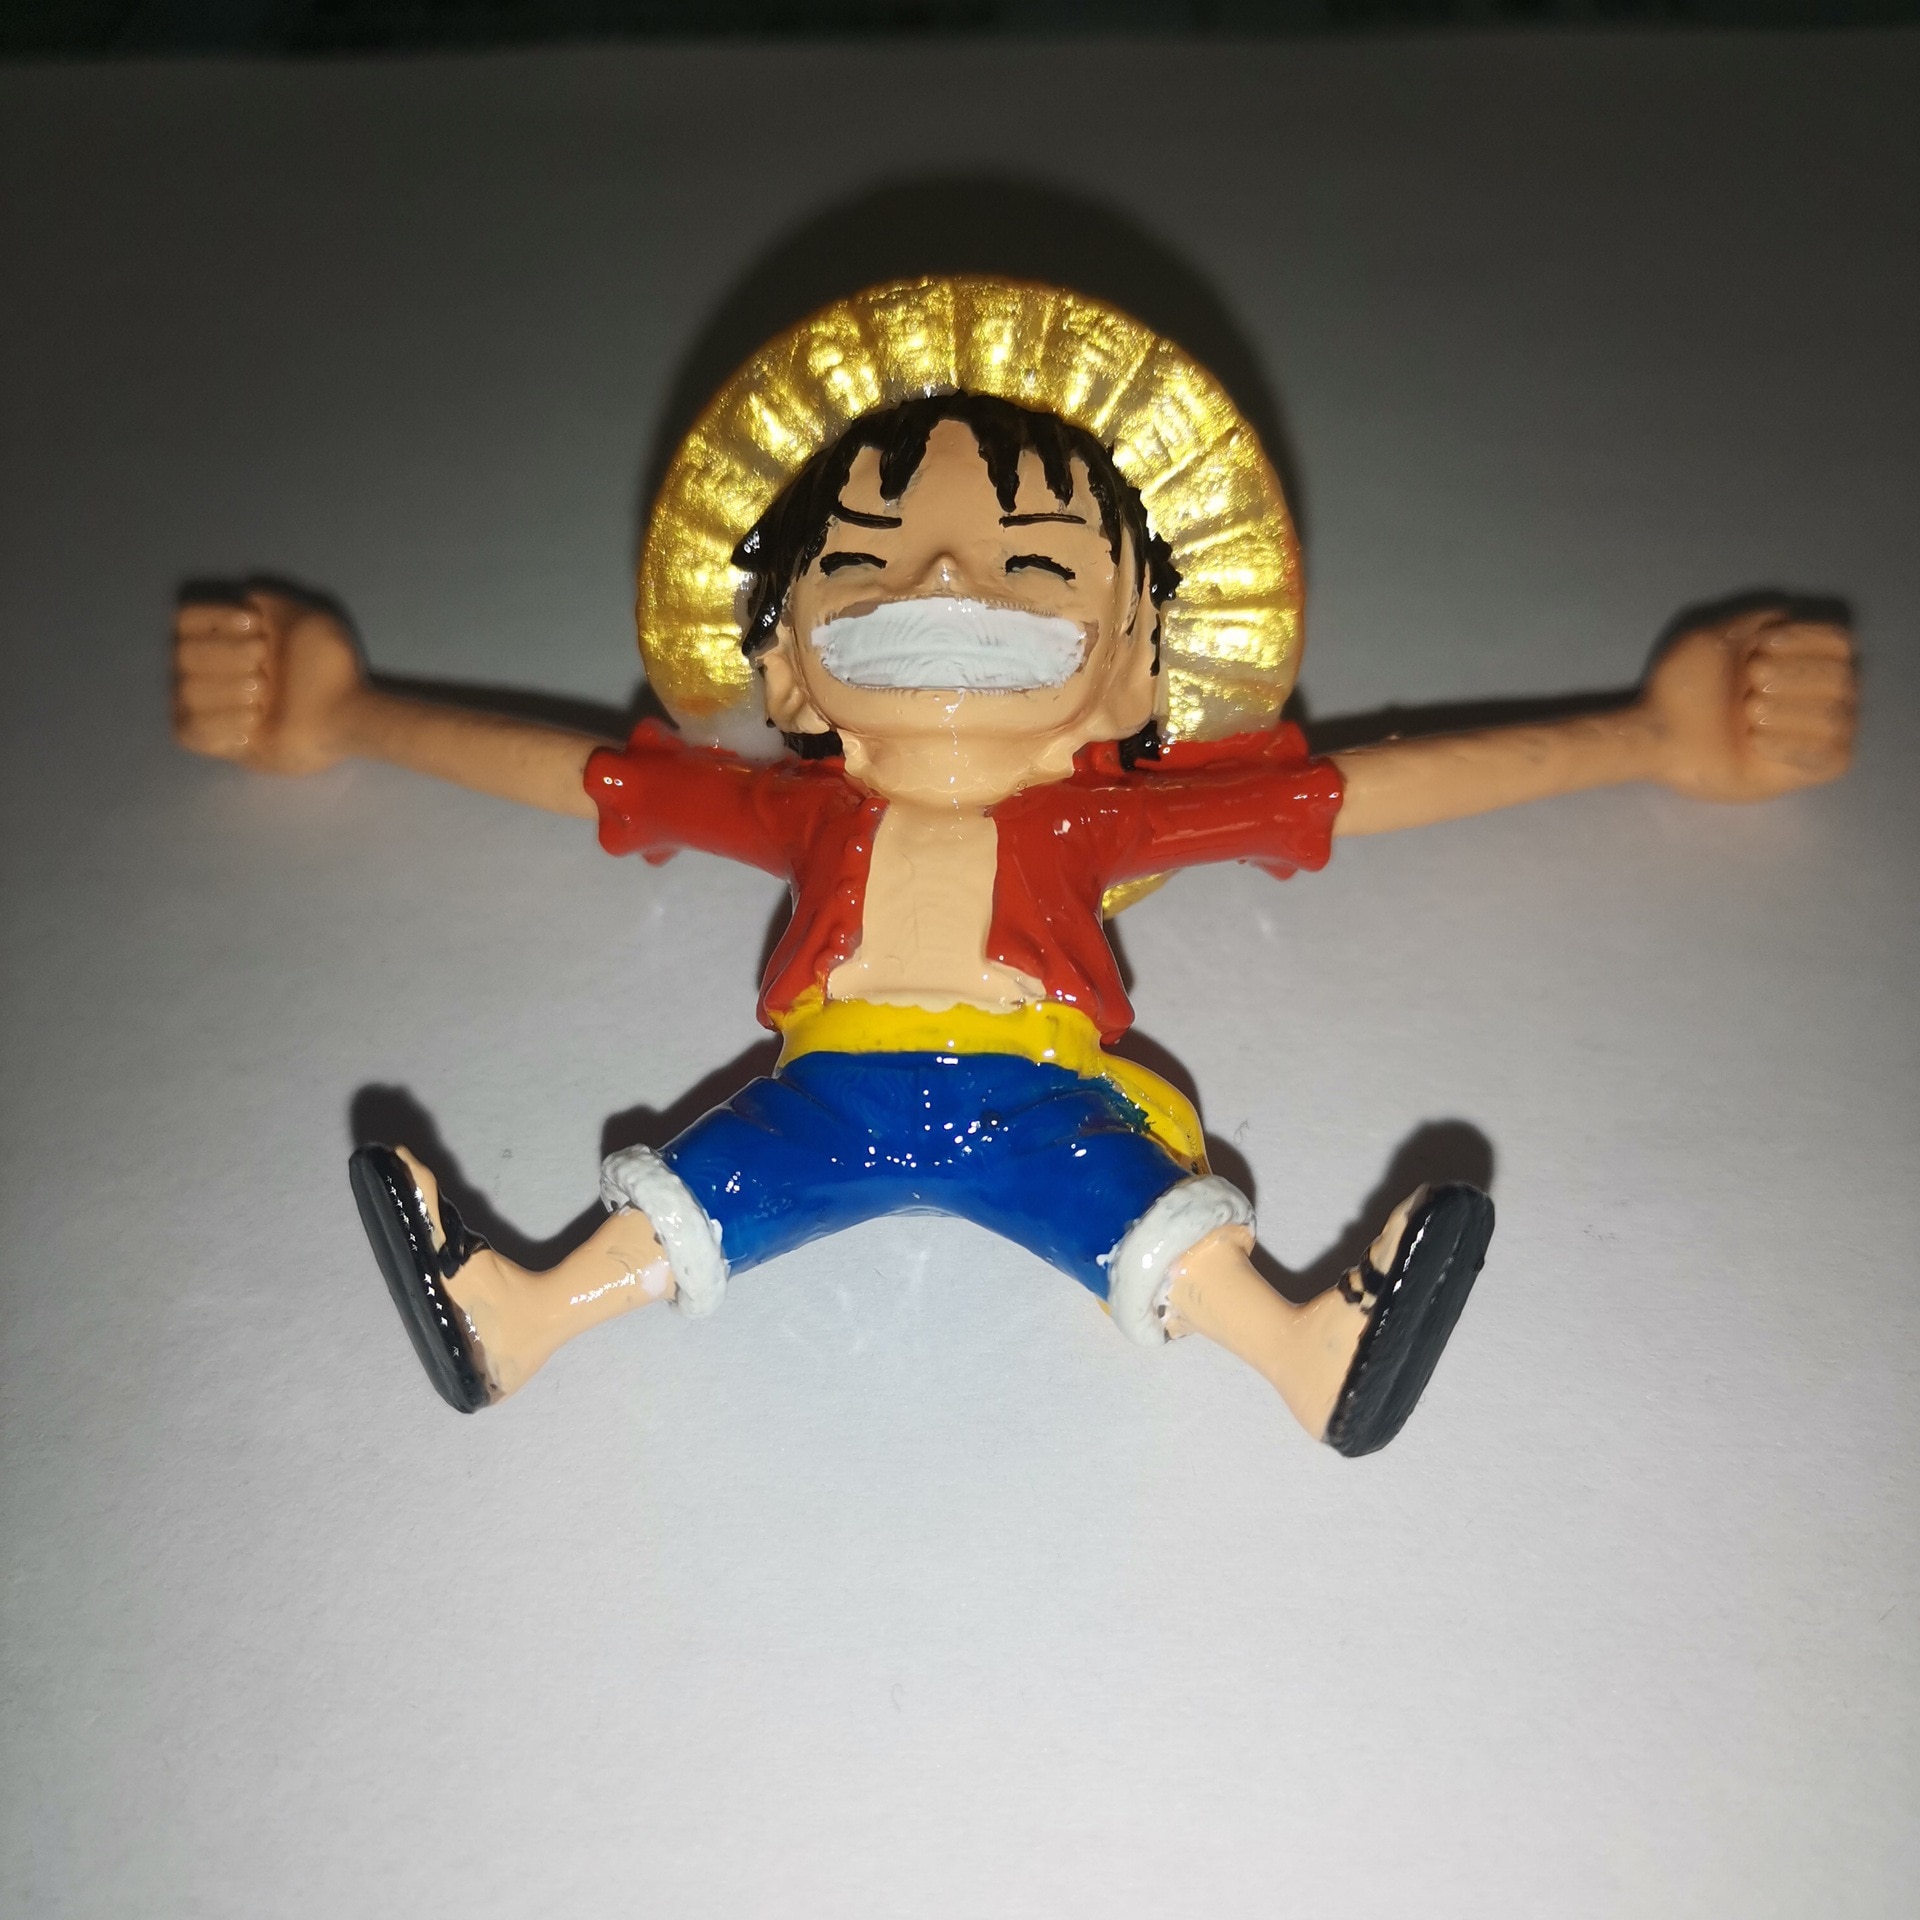 One Piece – Luffy action figure for holding a mask (Box/No Box) Action & Toy Figures